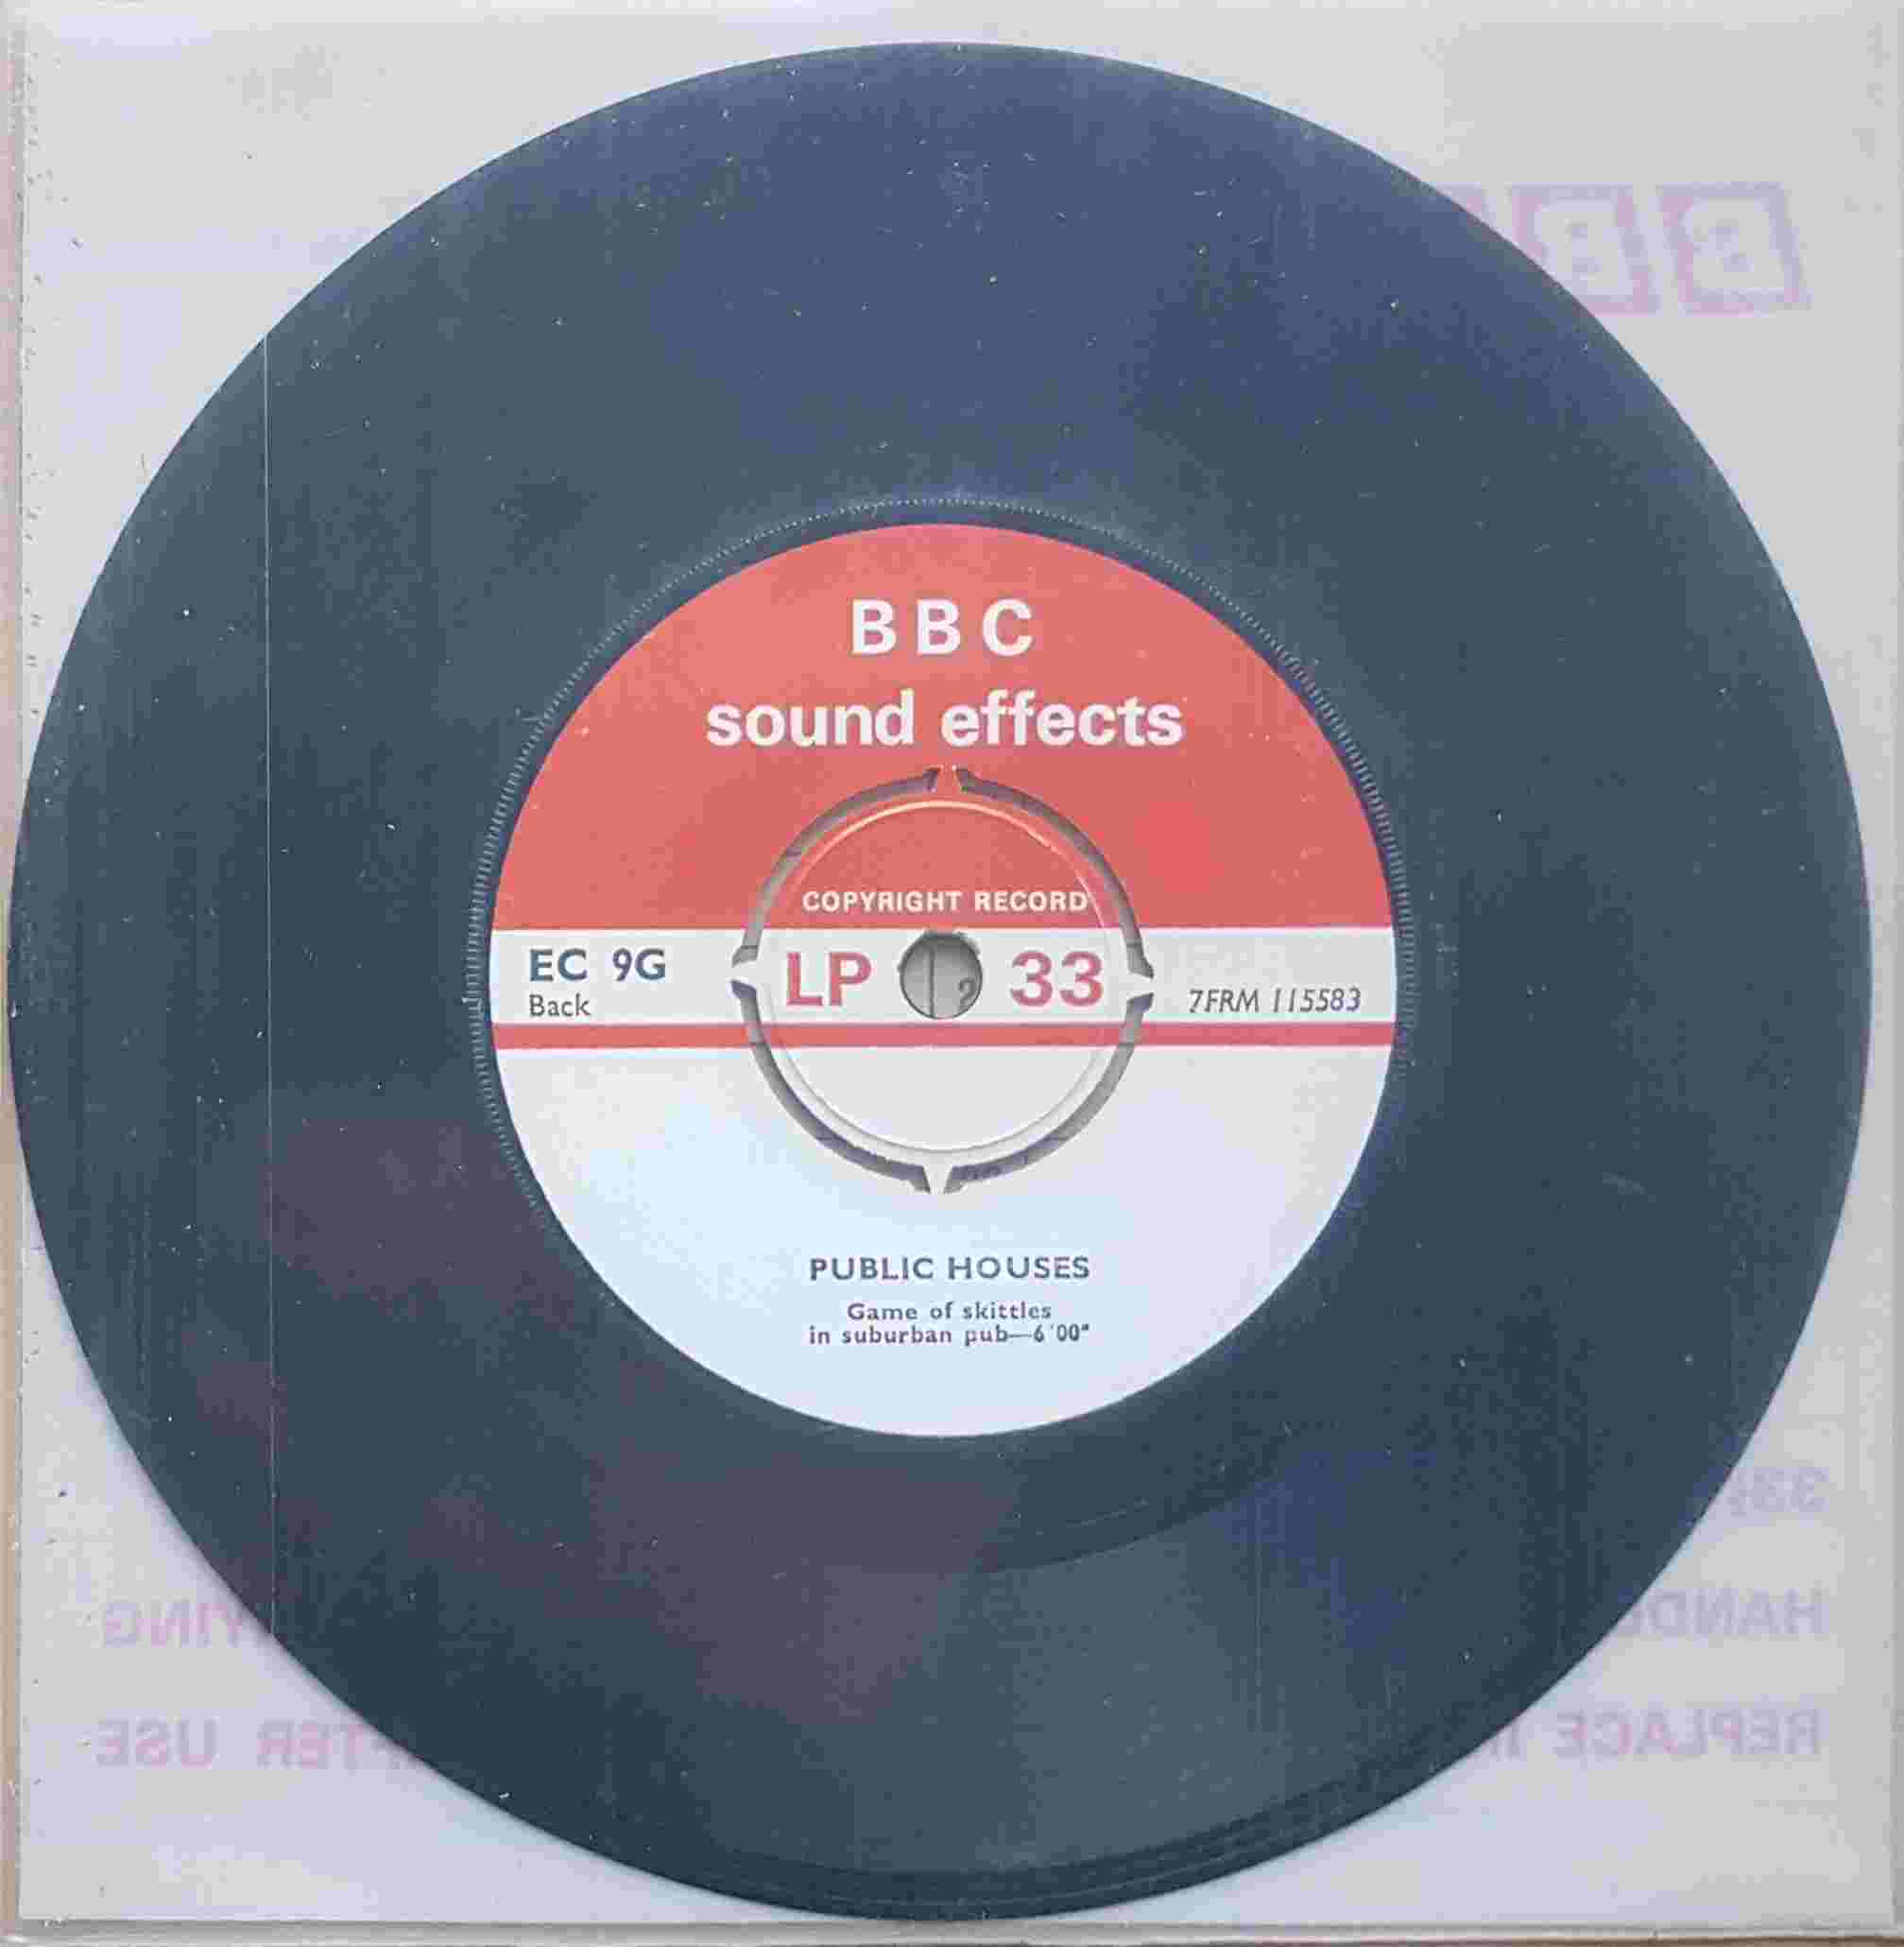 Picture of EC 9G Public houses by artist Not registered from the BBC records and Tapes library